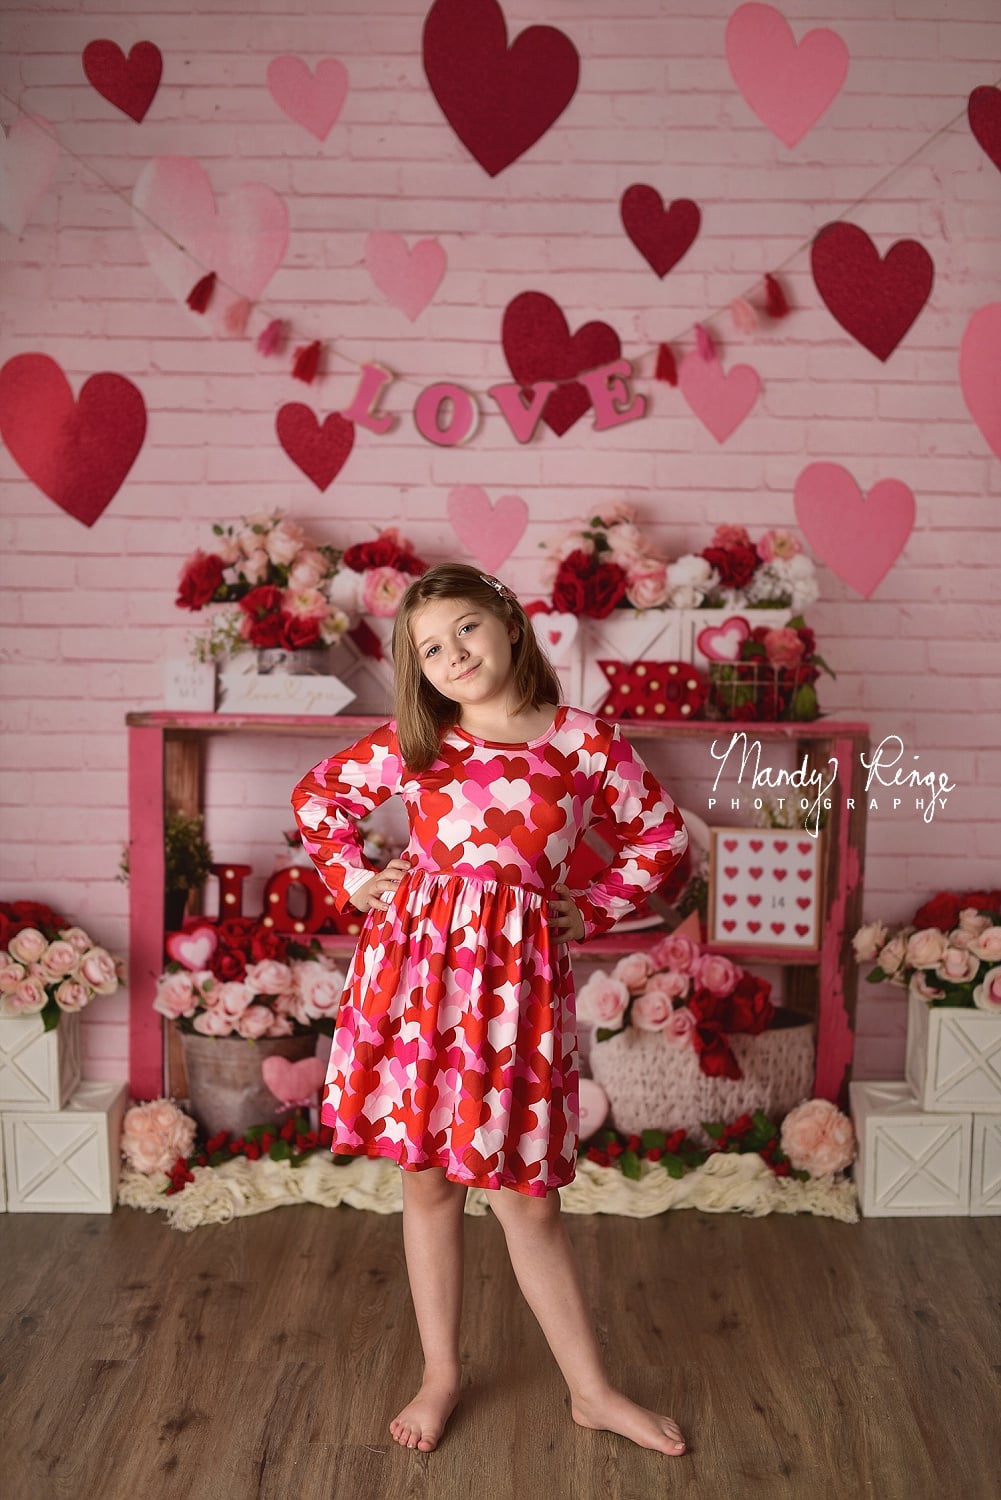 Kate Valentine's Day Love Backdrop Heart Designed by Mandy Ringe Photography